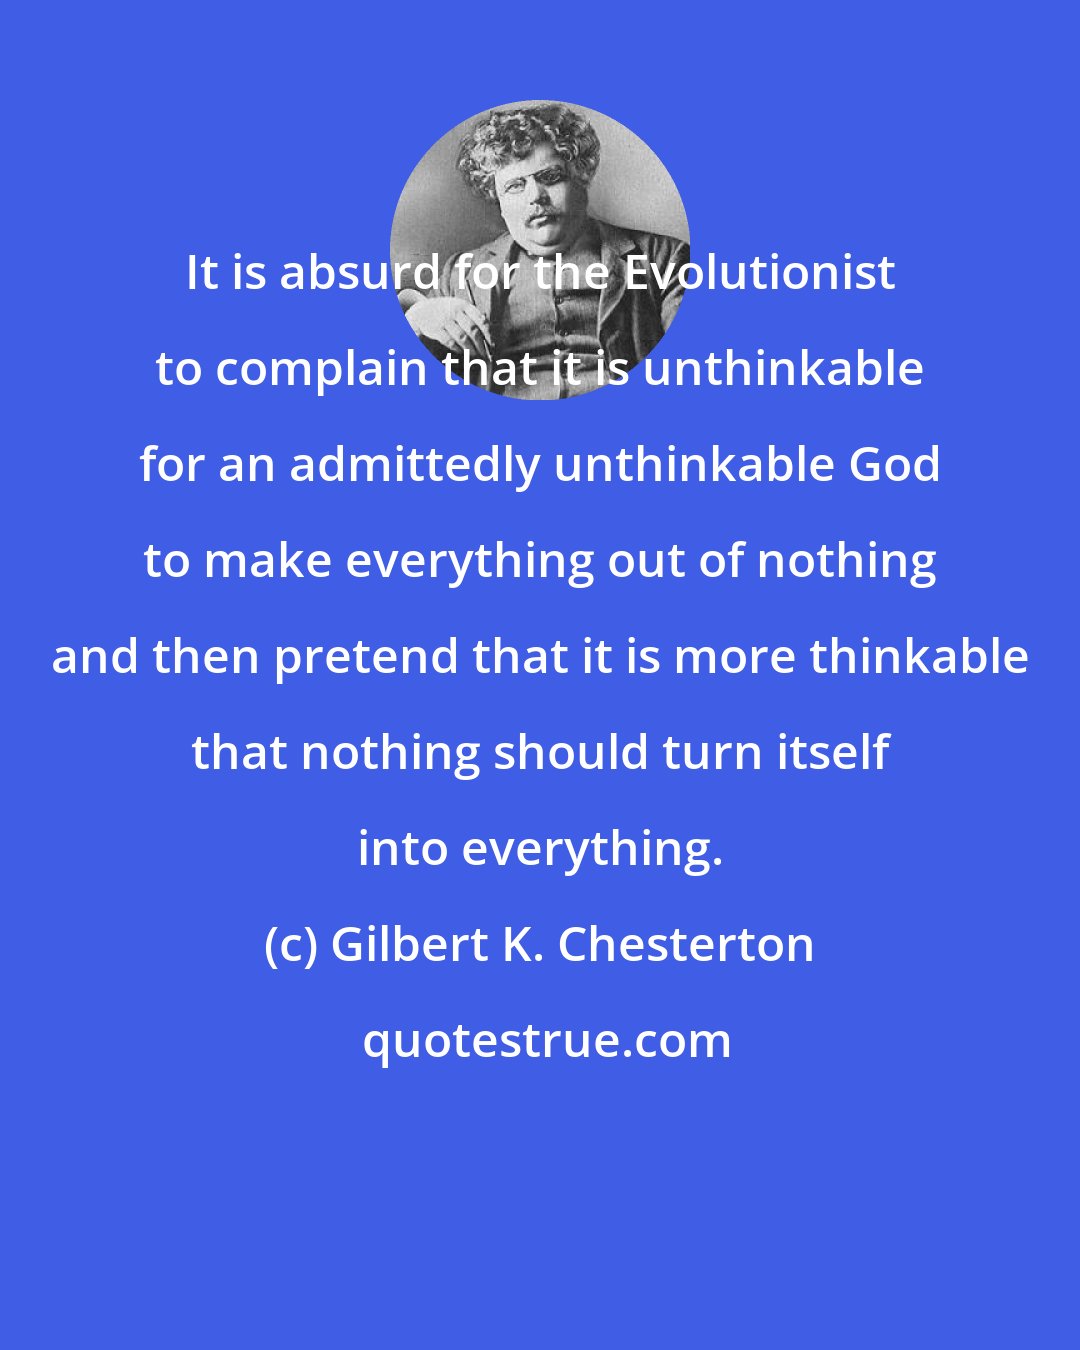 Gilbert K. Chesterton: It is absurd for the Evolutionist to complain that it is unthinkable for an admittedly unthinkable God to make everything out of nothing and then pretend that it is more thinkable that nothing should turn itself into everything.